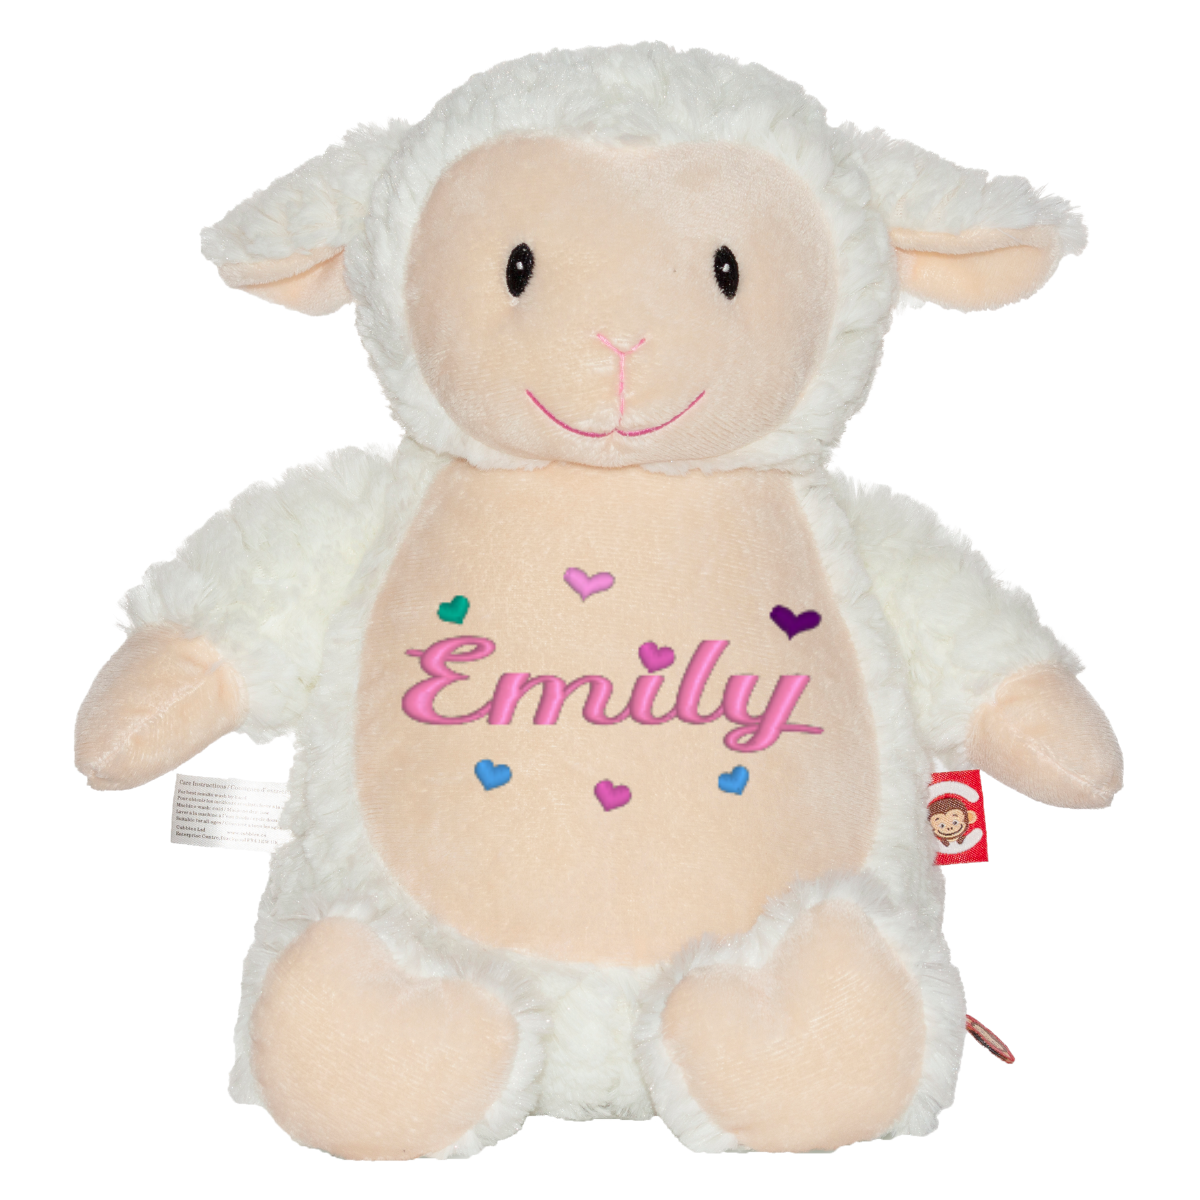 Fluffy Lamb Stuffed Animal Personalized with name